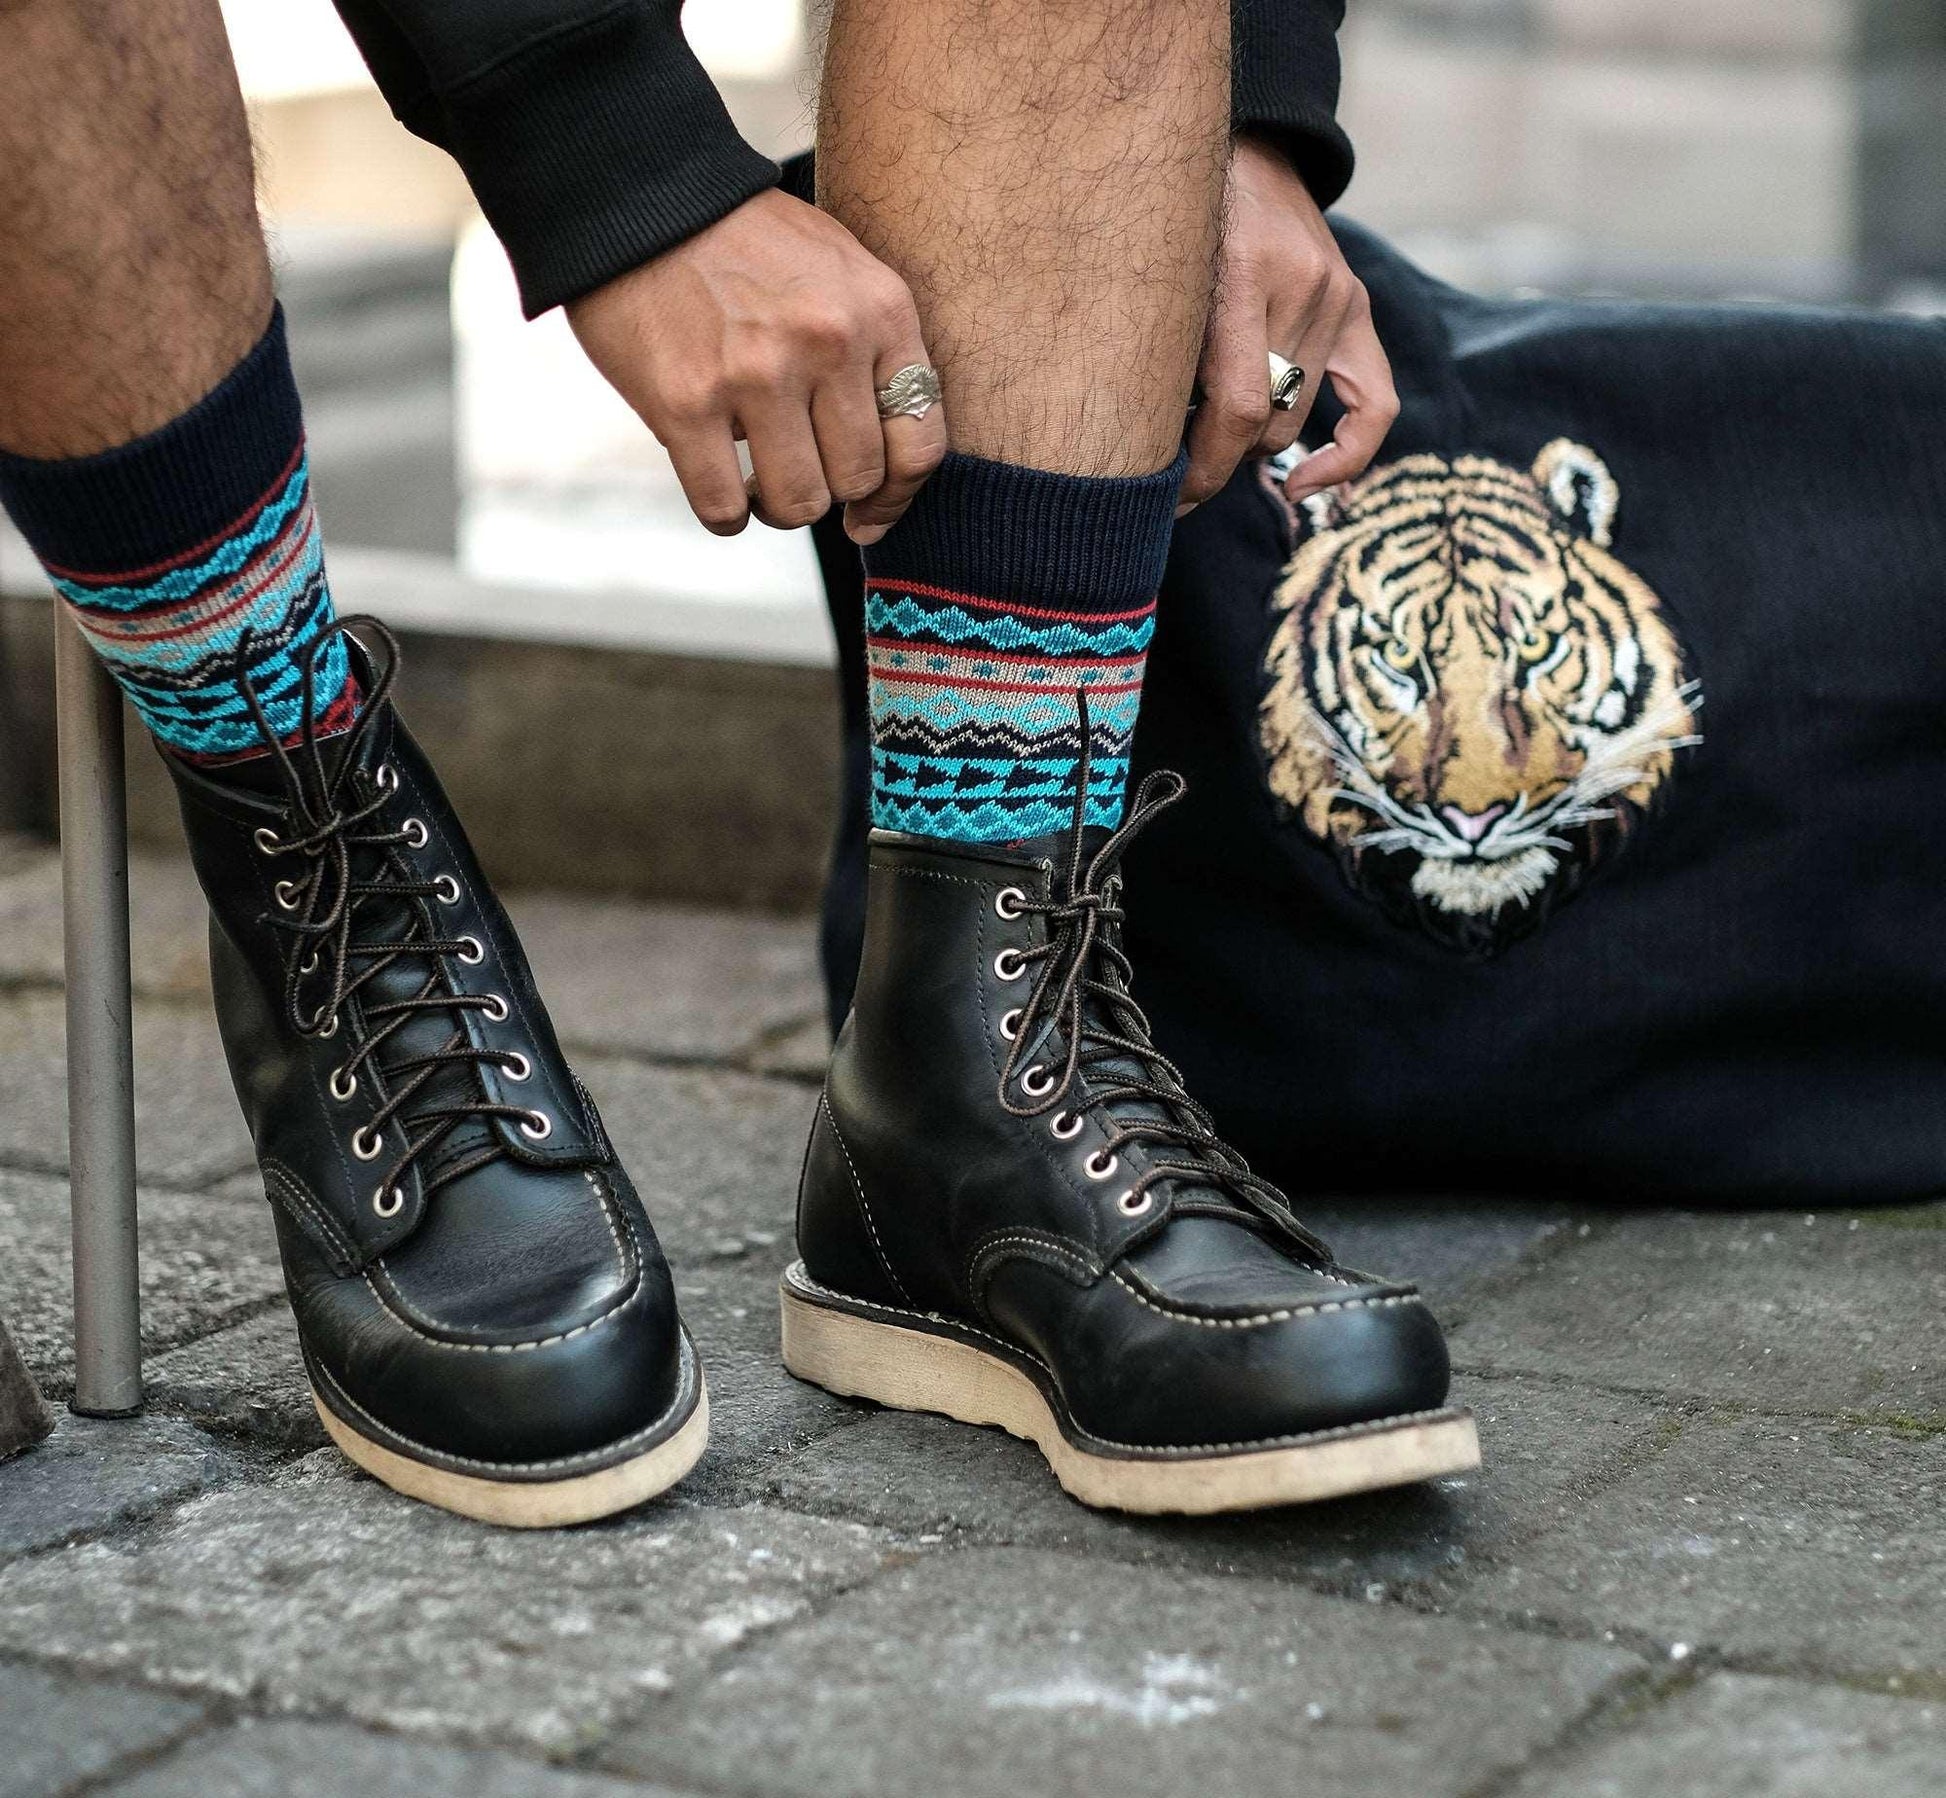 dylan navy blue socks with black red wing boots